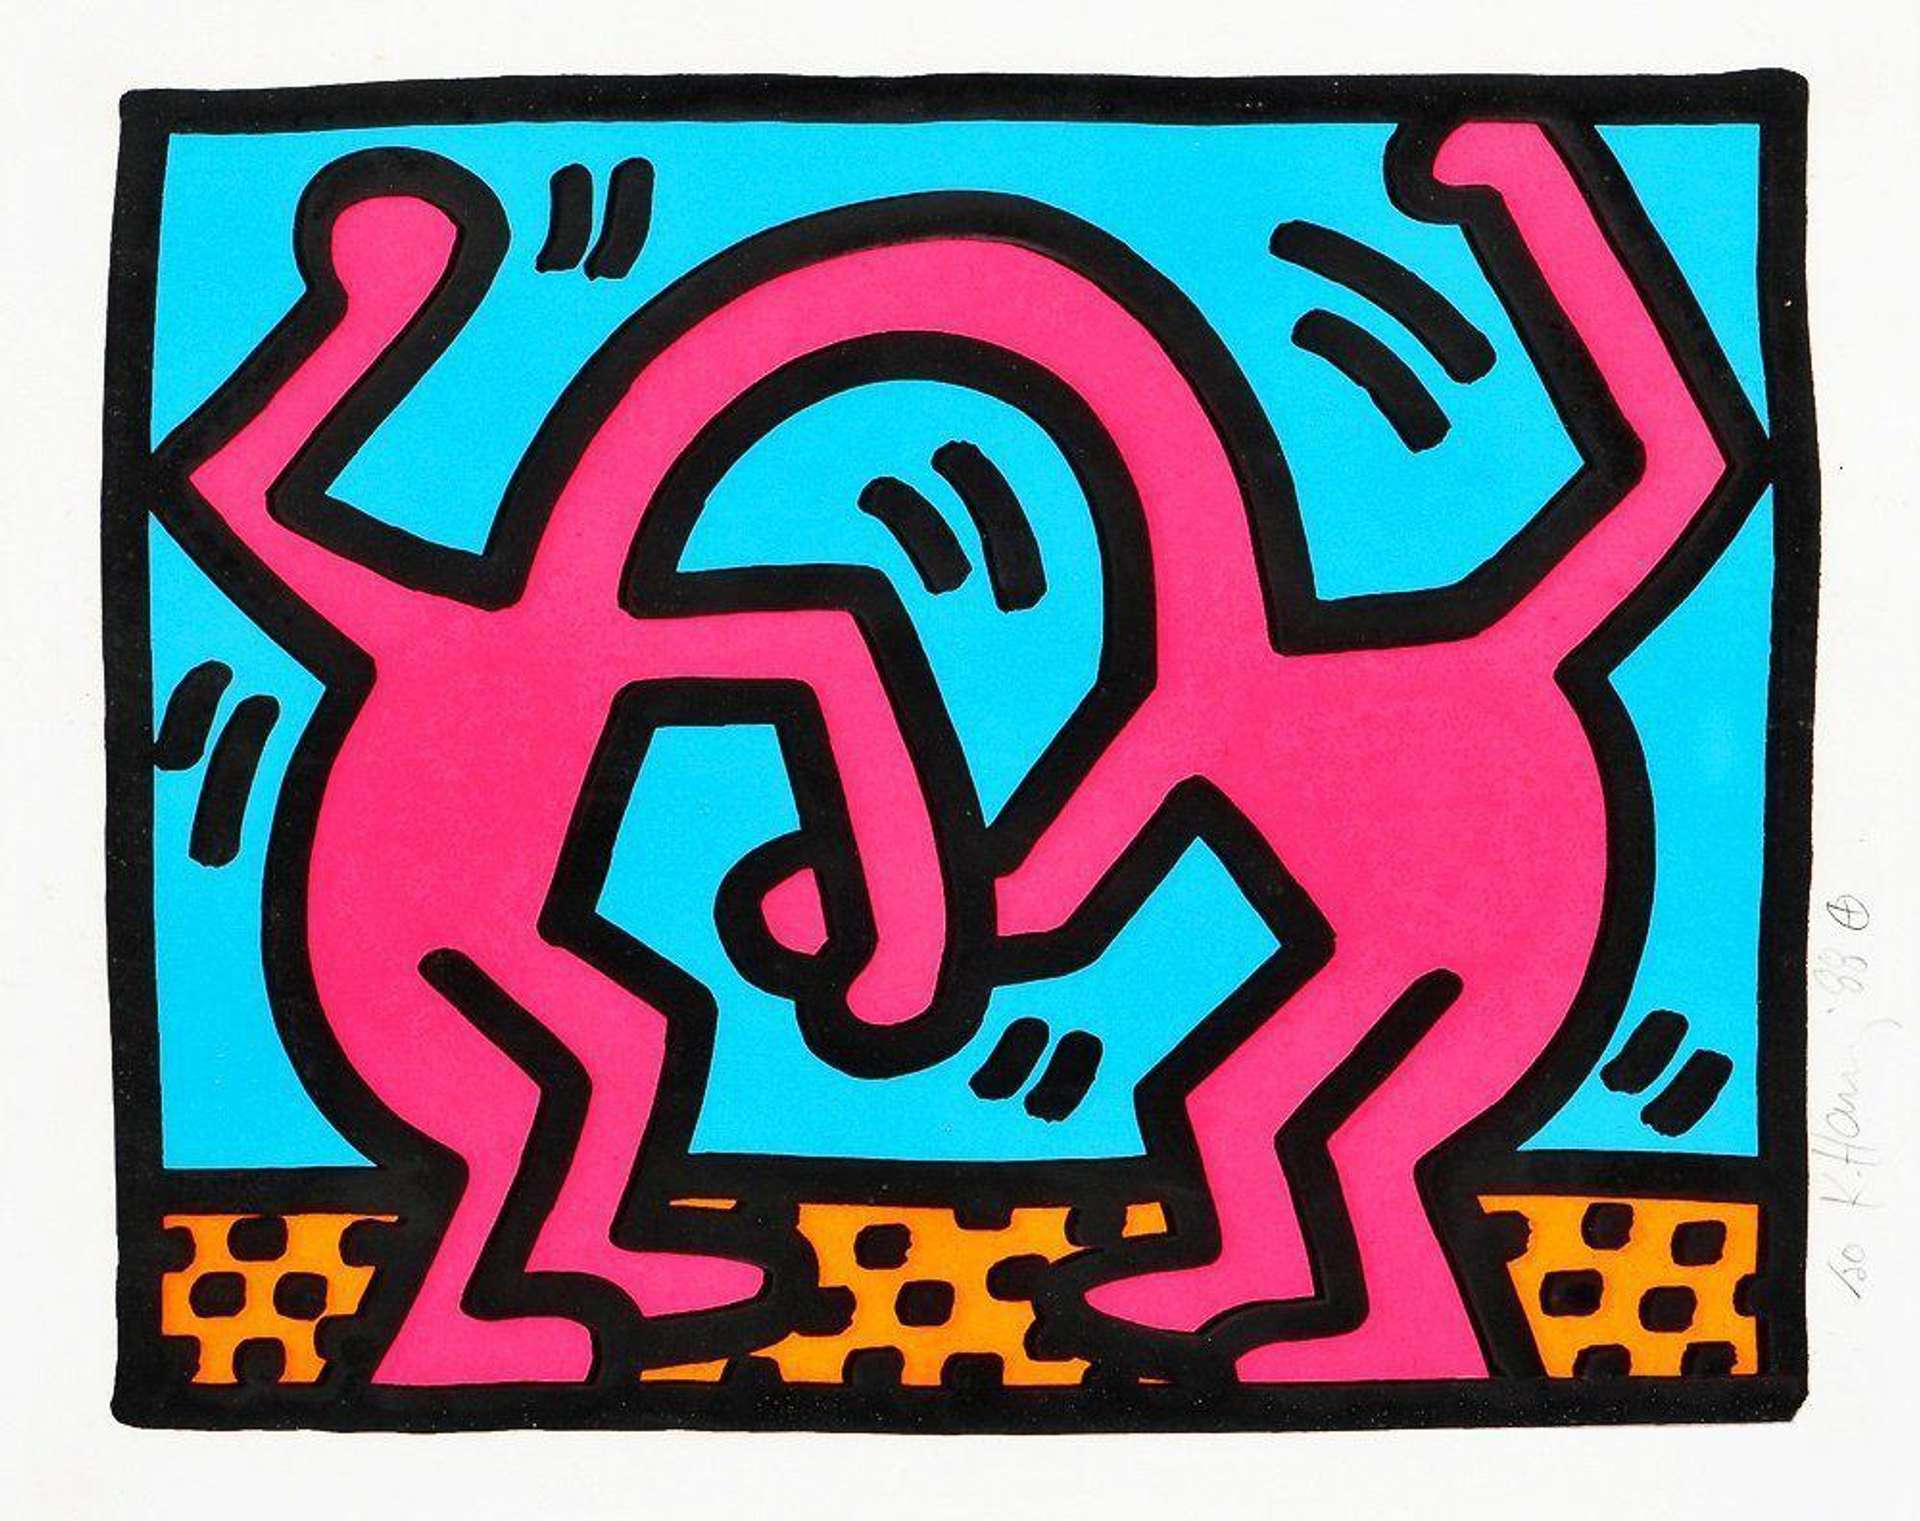 Pop Shop II, Plate IV by Keith Haring